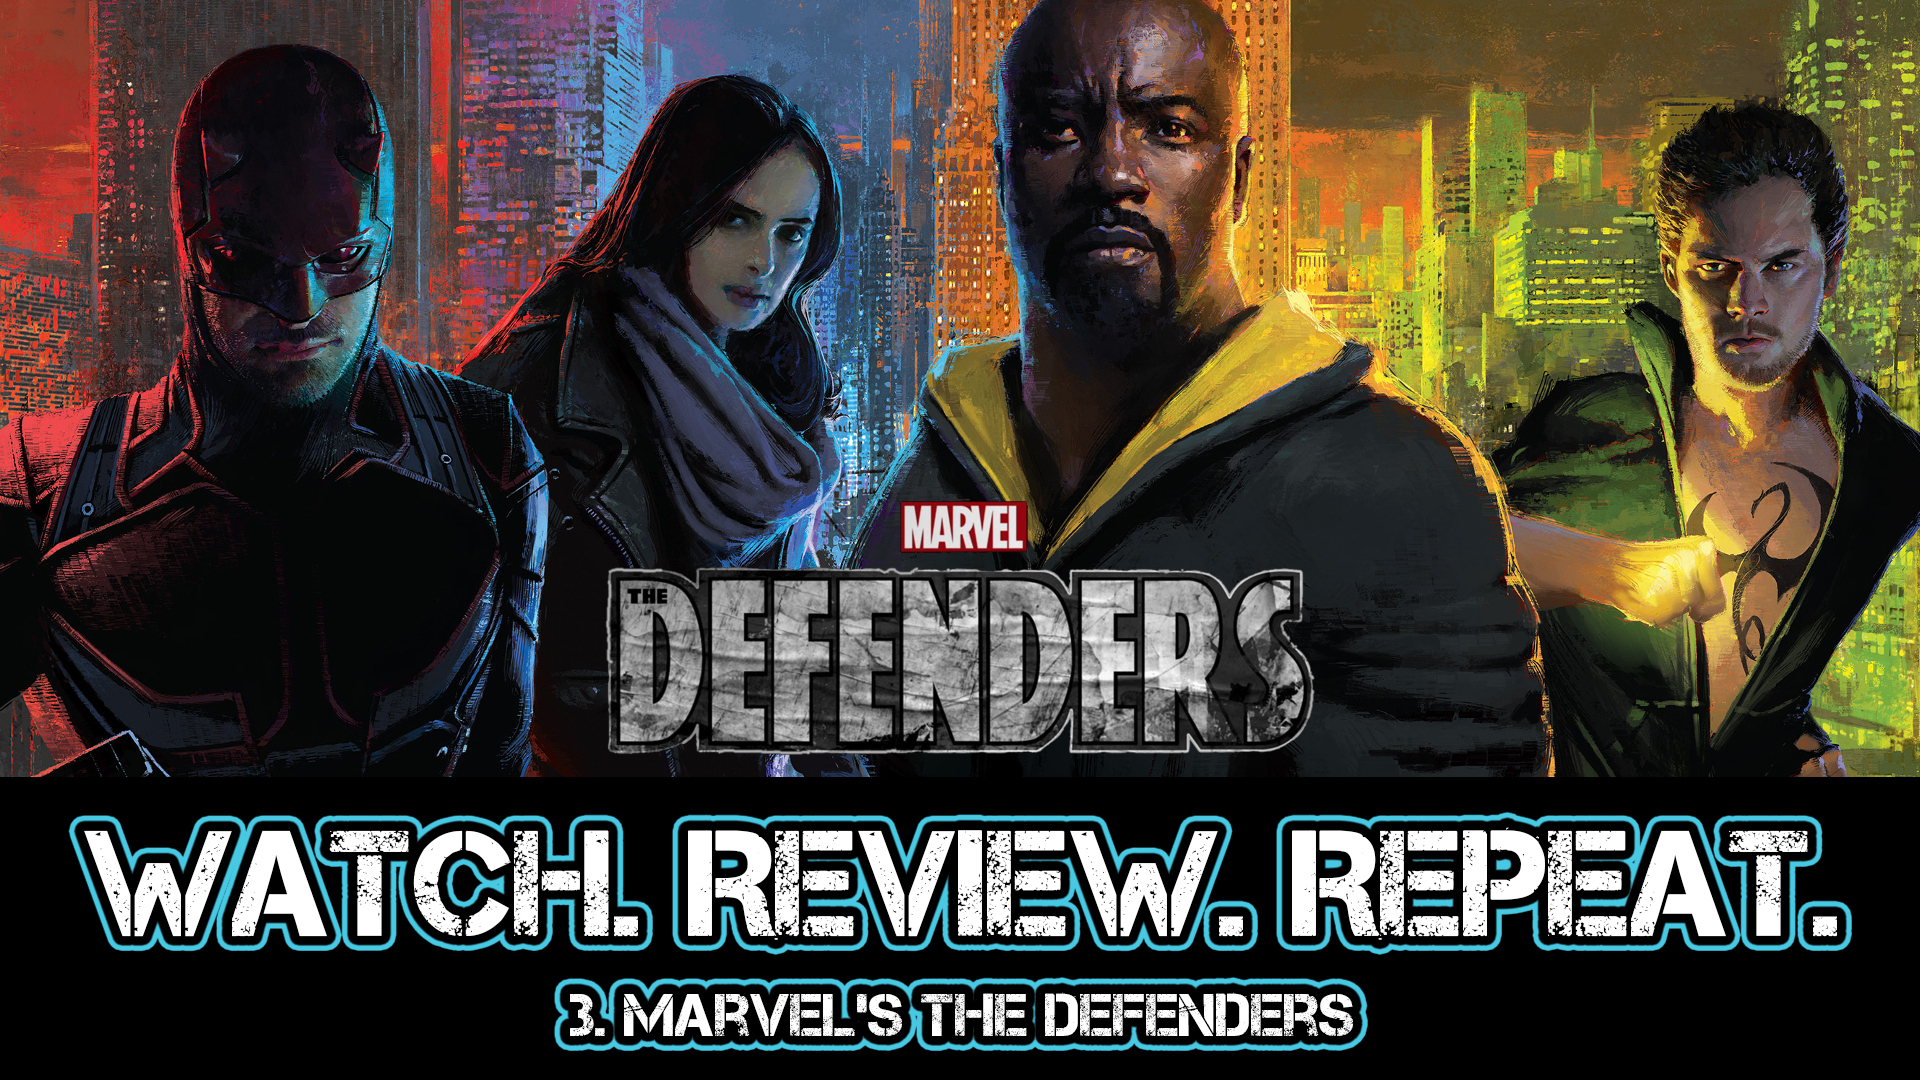 3. Marvel's The Defenders